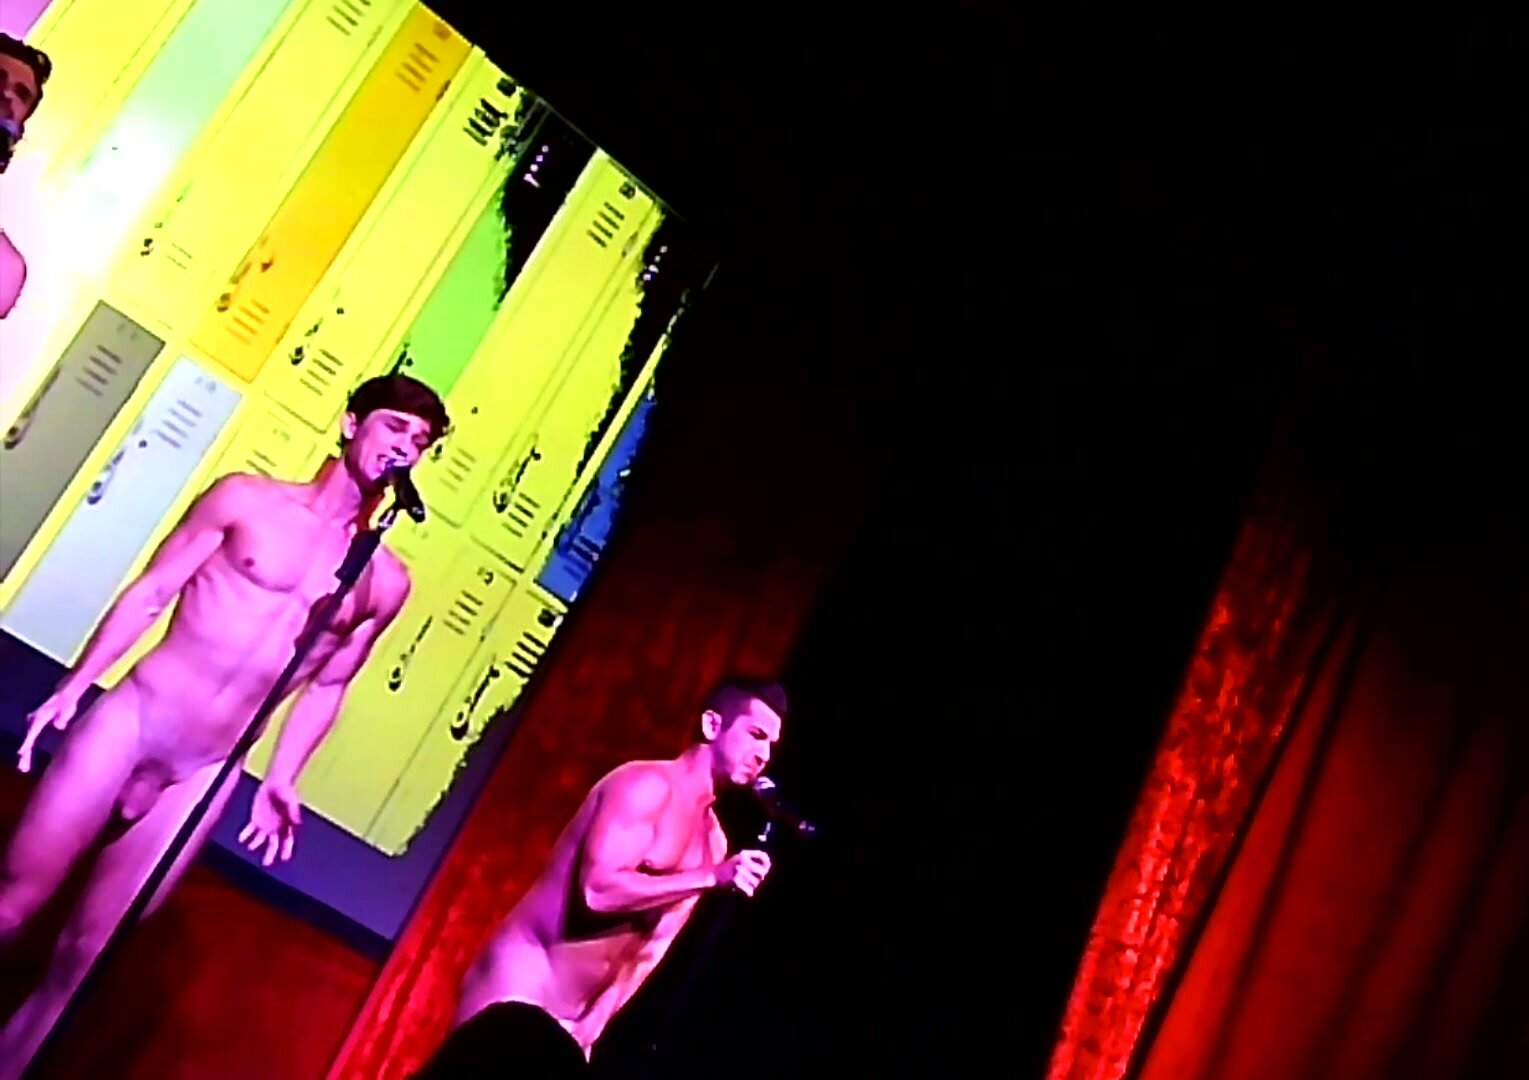 Hot guys perform nude on stage.